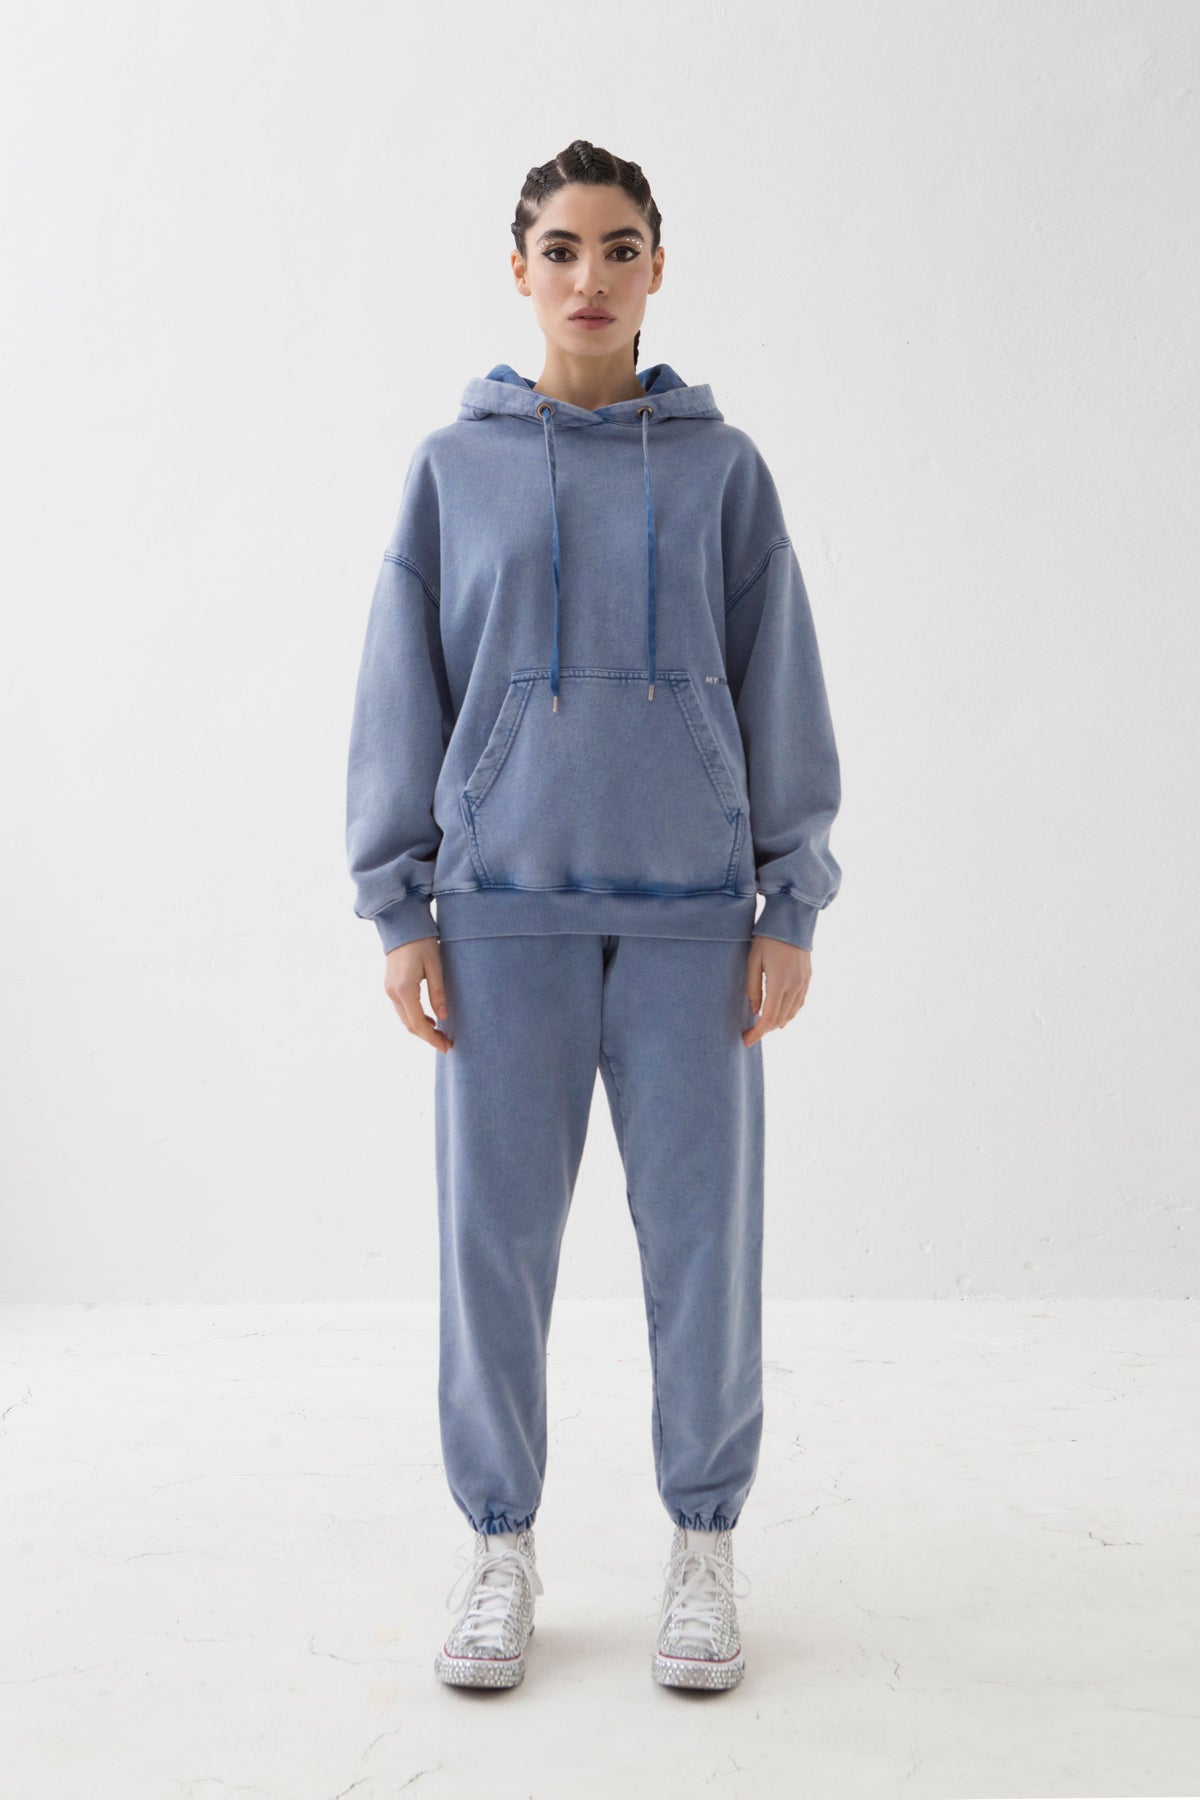 MYTRACKSUIT - HOODIE SWEATER / JOGGER PANTS BLUE